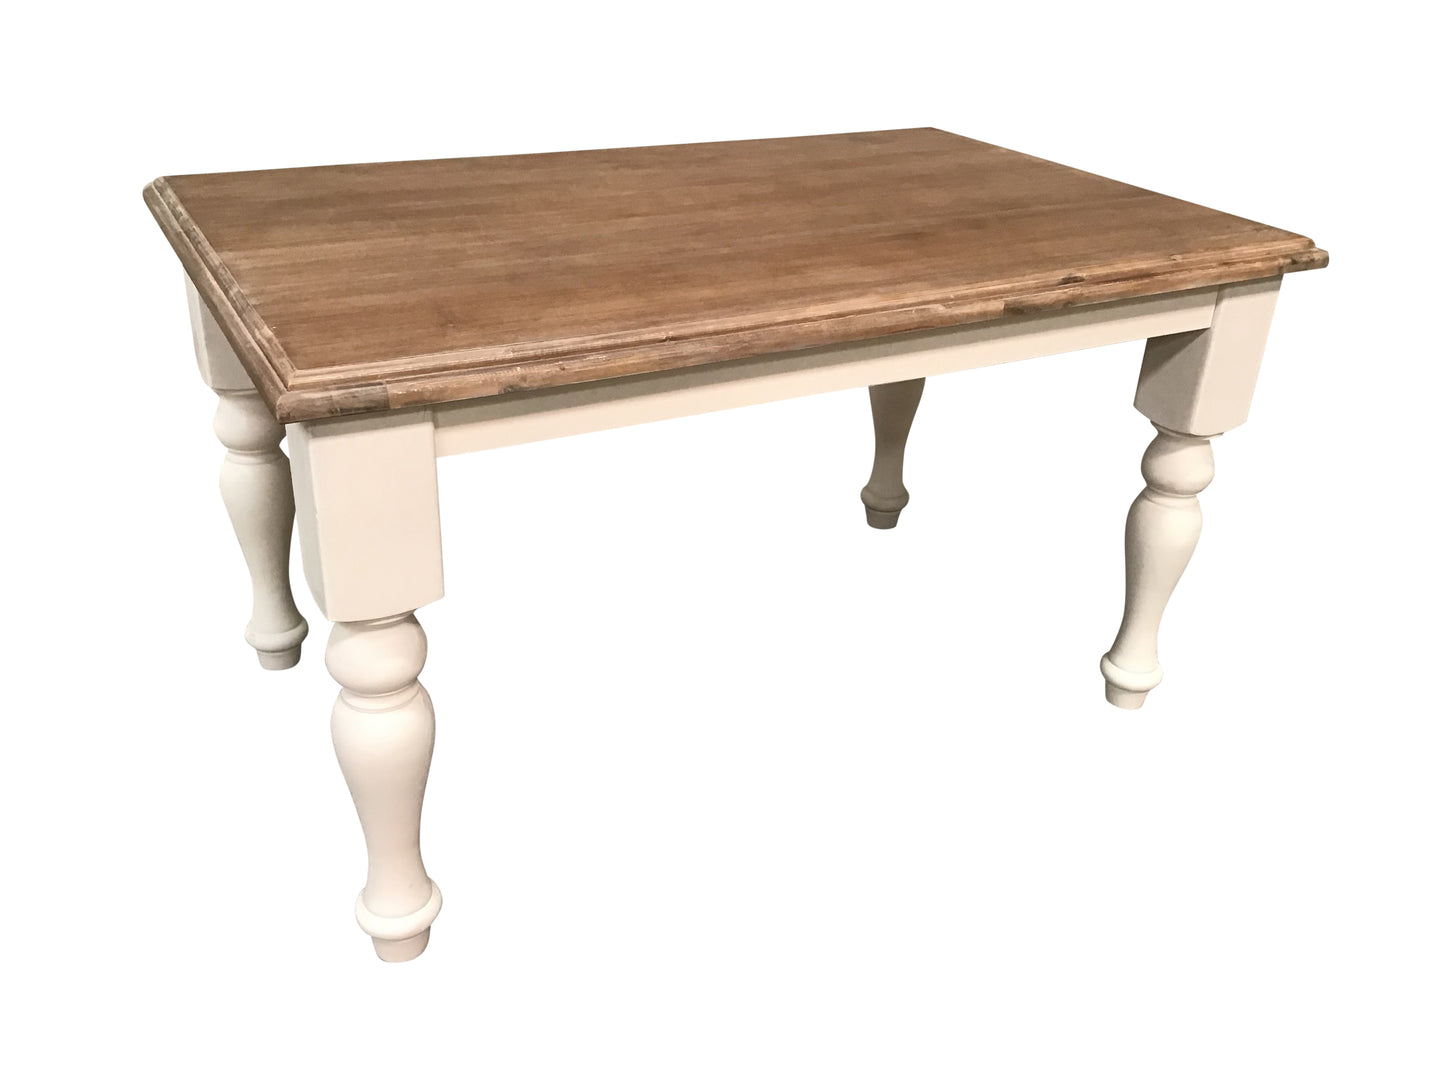 Biarritz 1.4m French Style Dining Table painted off-white